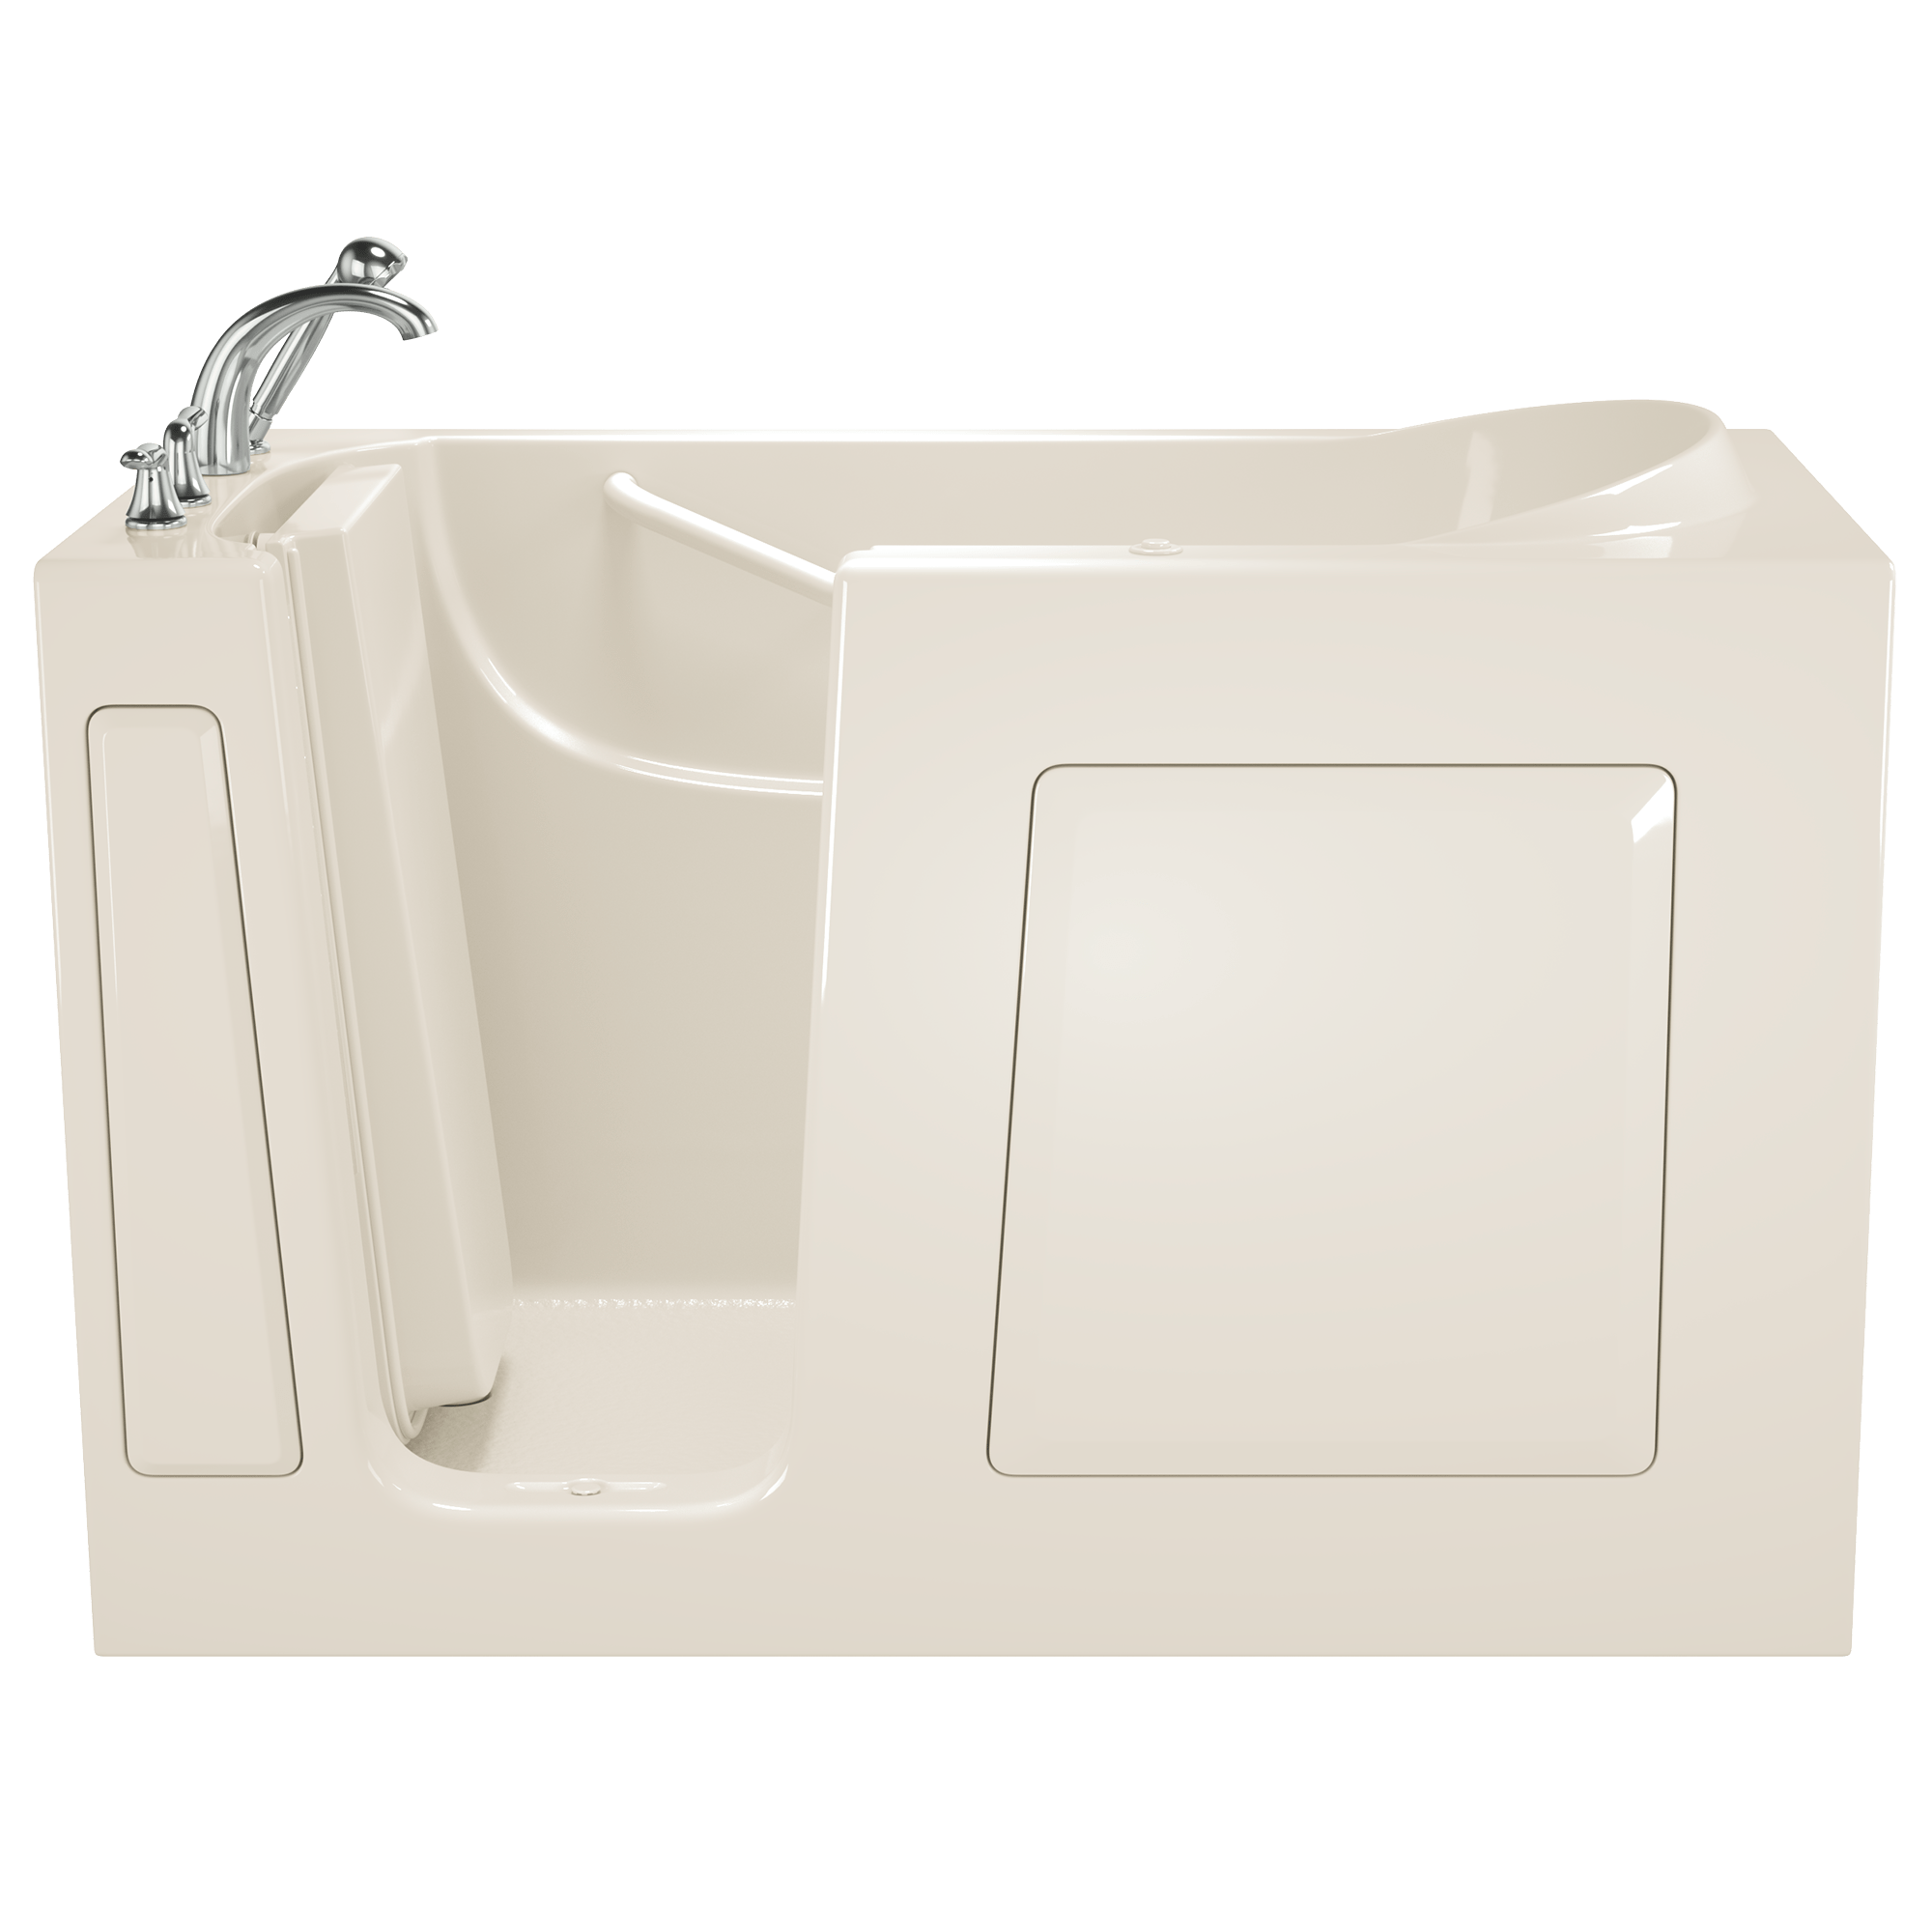 Gelcoat Entry Series 60 x 30 Inch Walk In Tub With Air Spa System - Left Hand Drain With Faucet ST BISCUIT